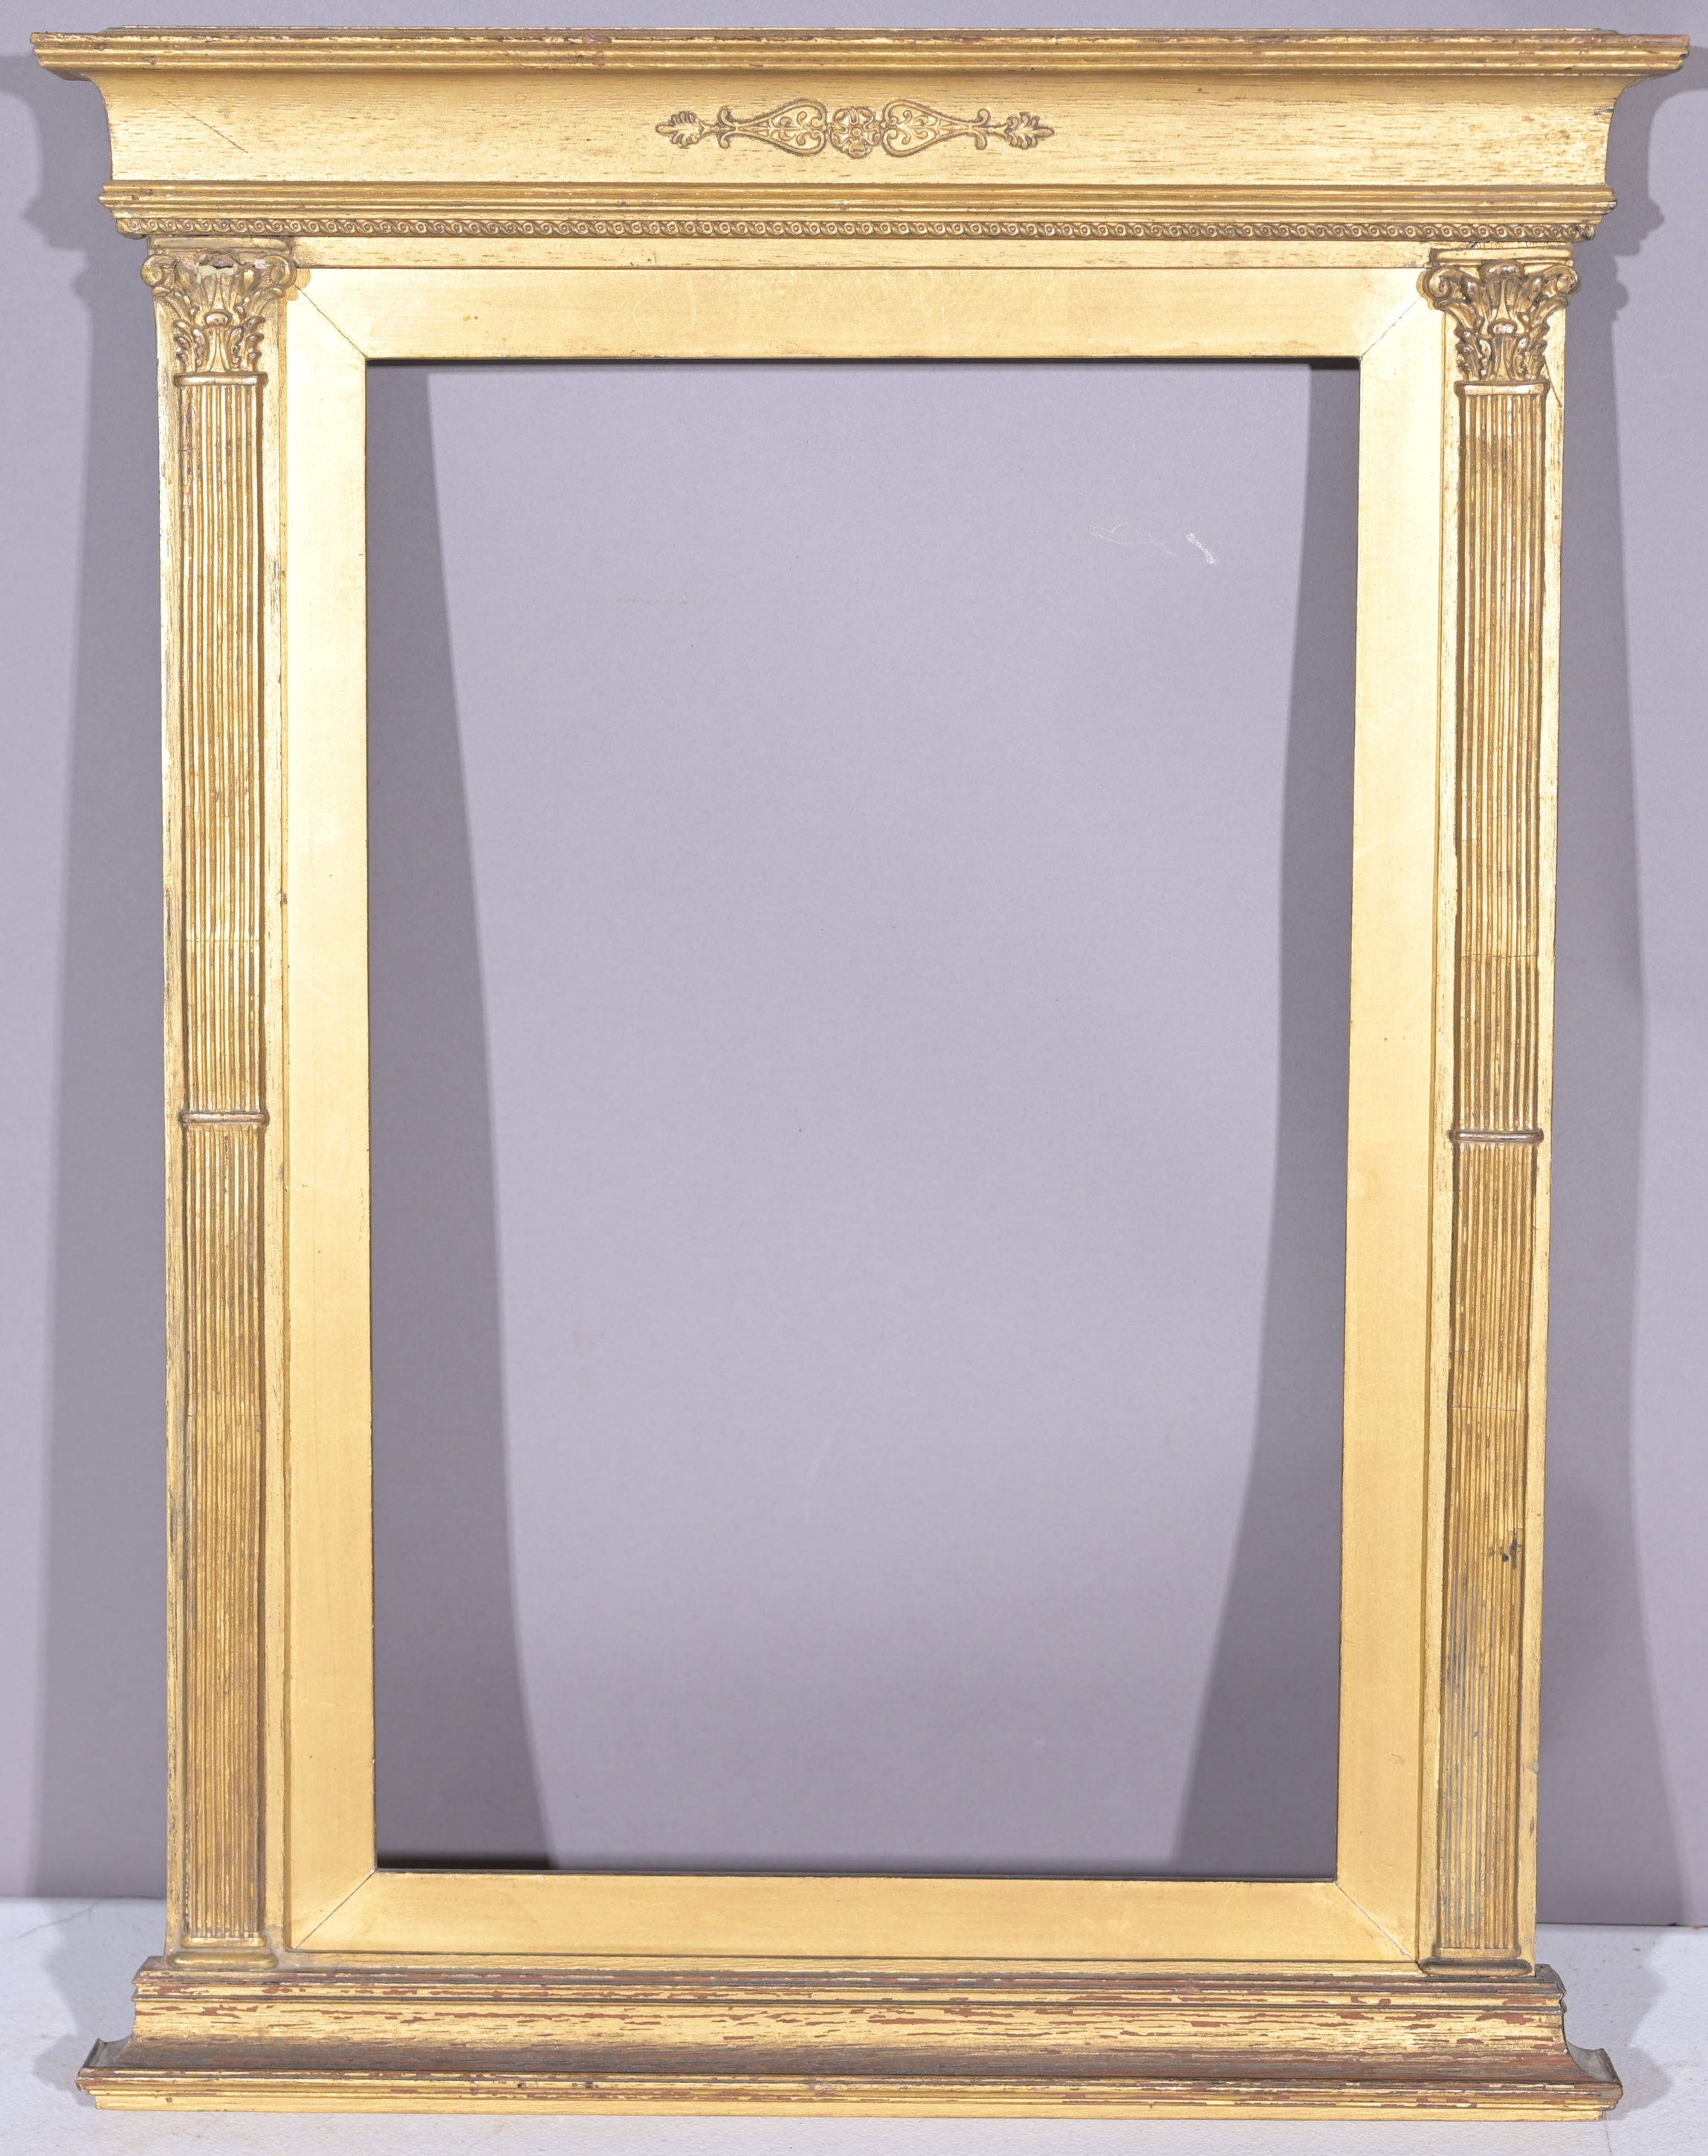 Antique Gilt Tabernacle Frame - 16.25 x 10.5 - Image 2 of 6